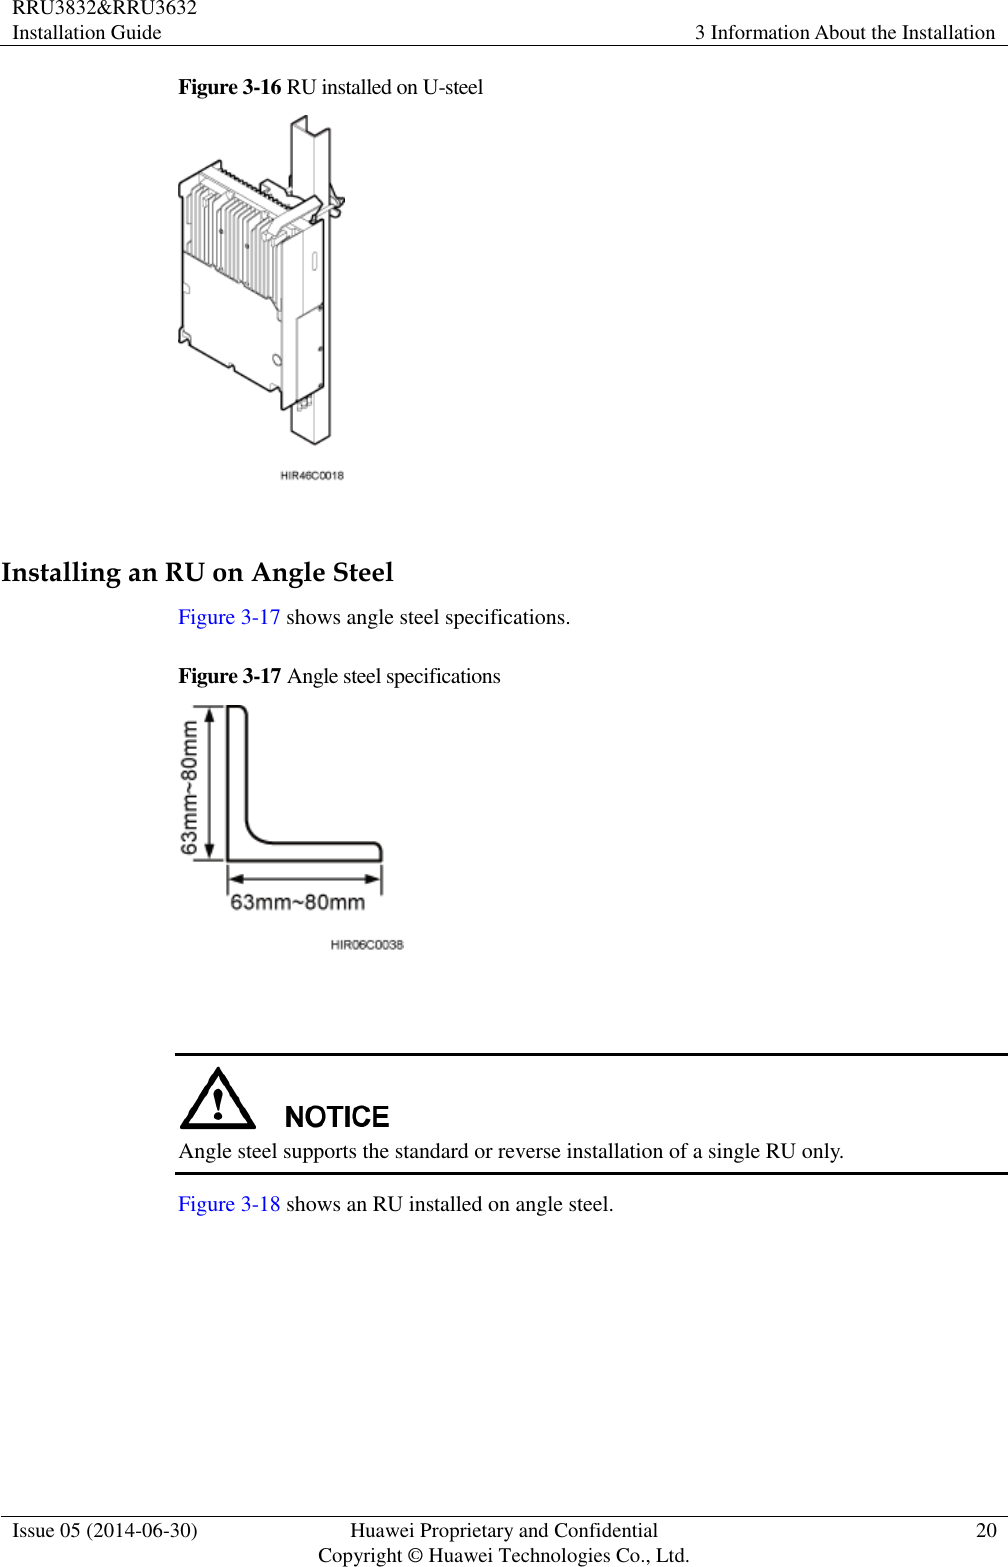 RRU3832&amp;RRU3632 Installation Guide 3 Information About the Installation  Issue 05 (2014-06-30) Huawei Proprietary and Confidential                                     Copyright © Huawei Technologies Co., Ltd. 20  Figure 3-16 RU installed on U-steel   Installing an RU on Angle Steel Figure 3-17 shows angle steel specifications. Figure 3-17 Angle steel specifications     Angle steel supports the standard or reverse installation of a single RU only. Figure 3-18 shows an RU installed on angle steel. 